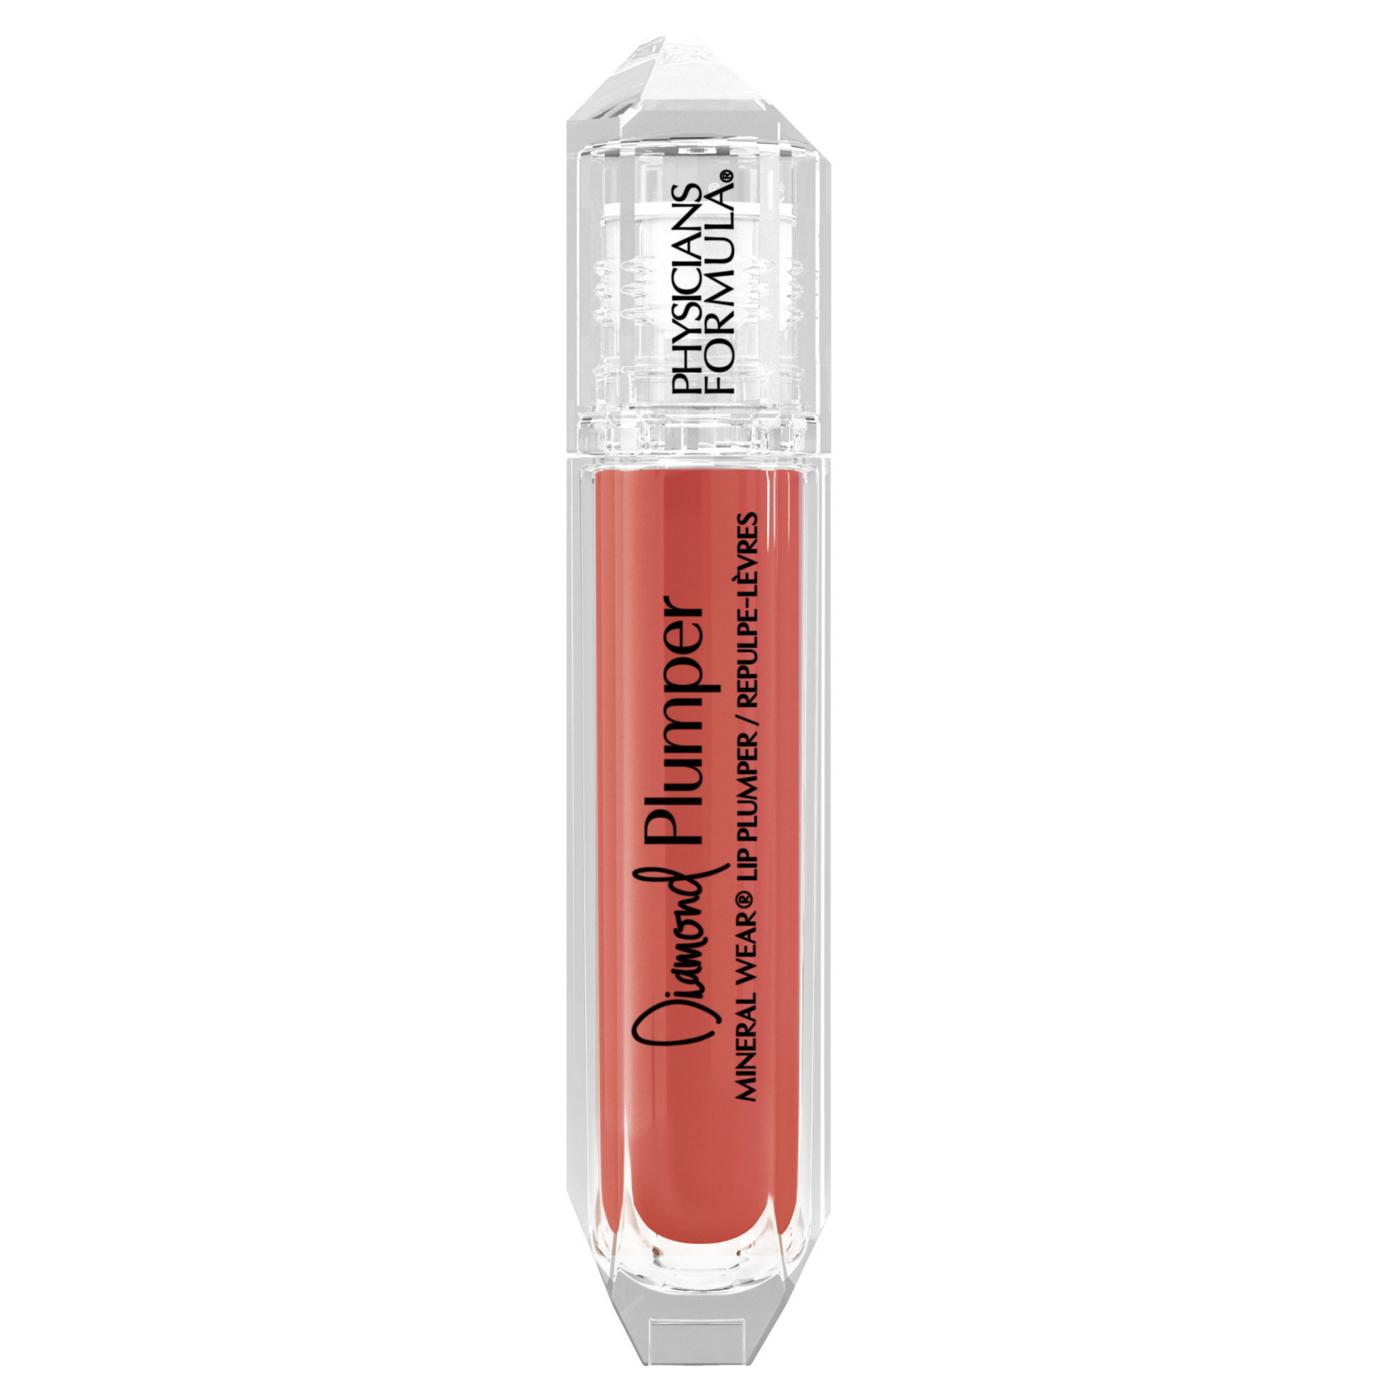 Physicians Formula Diamond Plumper Mineral Wear Champagne; image 1 of 6